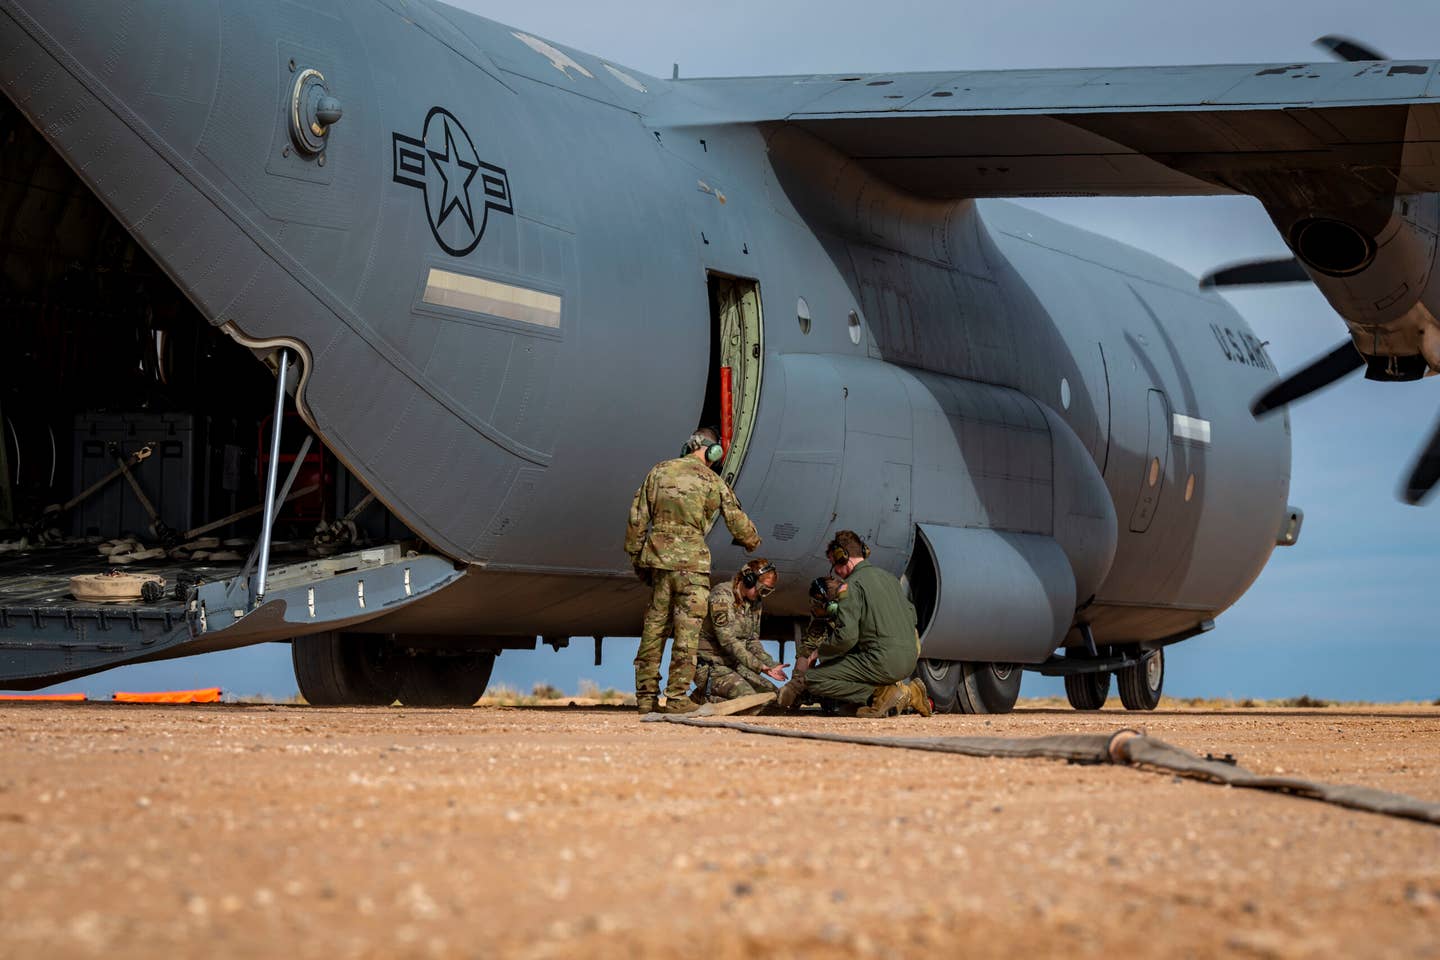 U.S. Airmen from the 40th Airlift Squadron pack up the ERREK after simulating refueling an M1A2 Abrams tank from a C-130J Super Hercules. <em>Credit: U.S. Air Force photo by Senior Airman Leon Redfern</em>